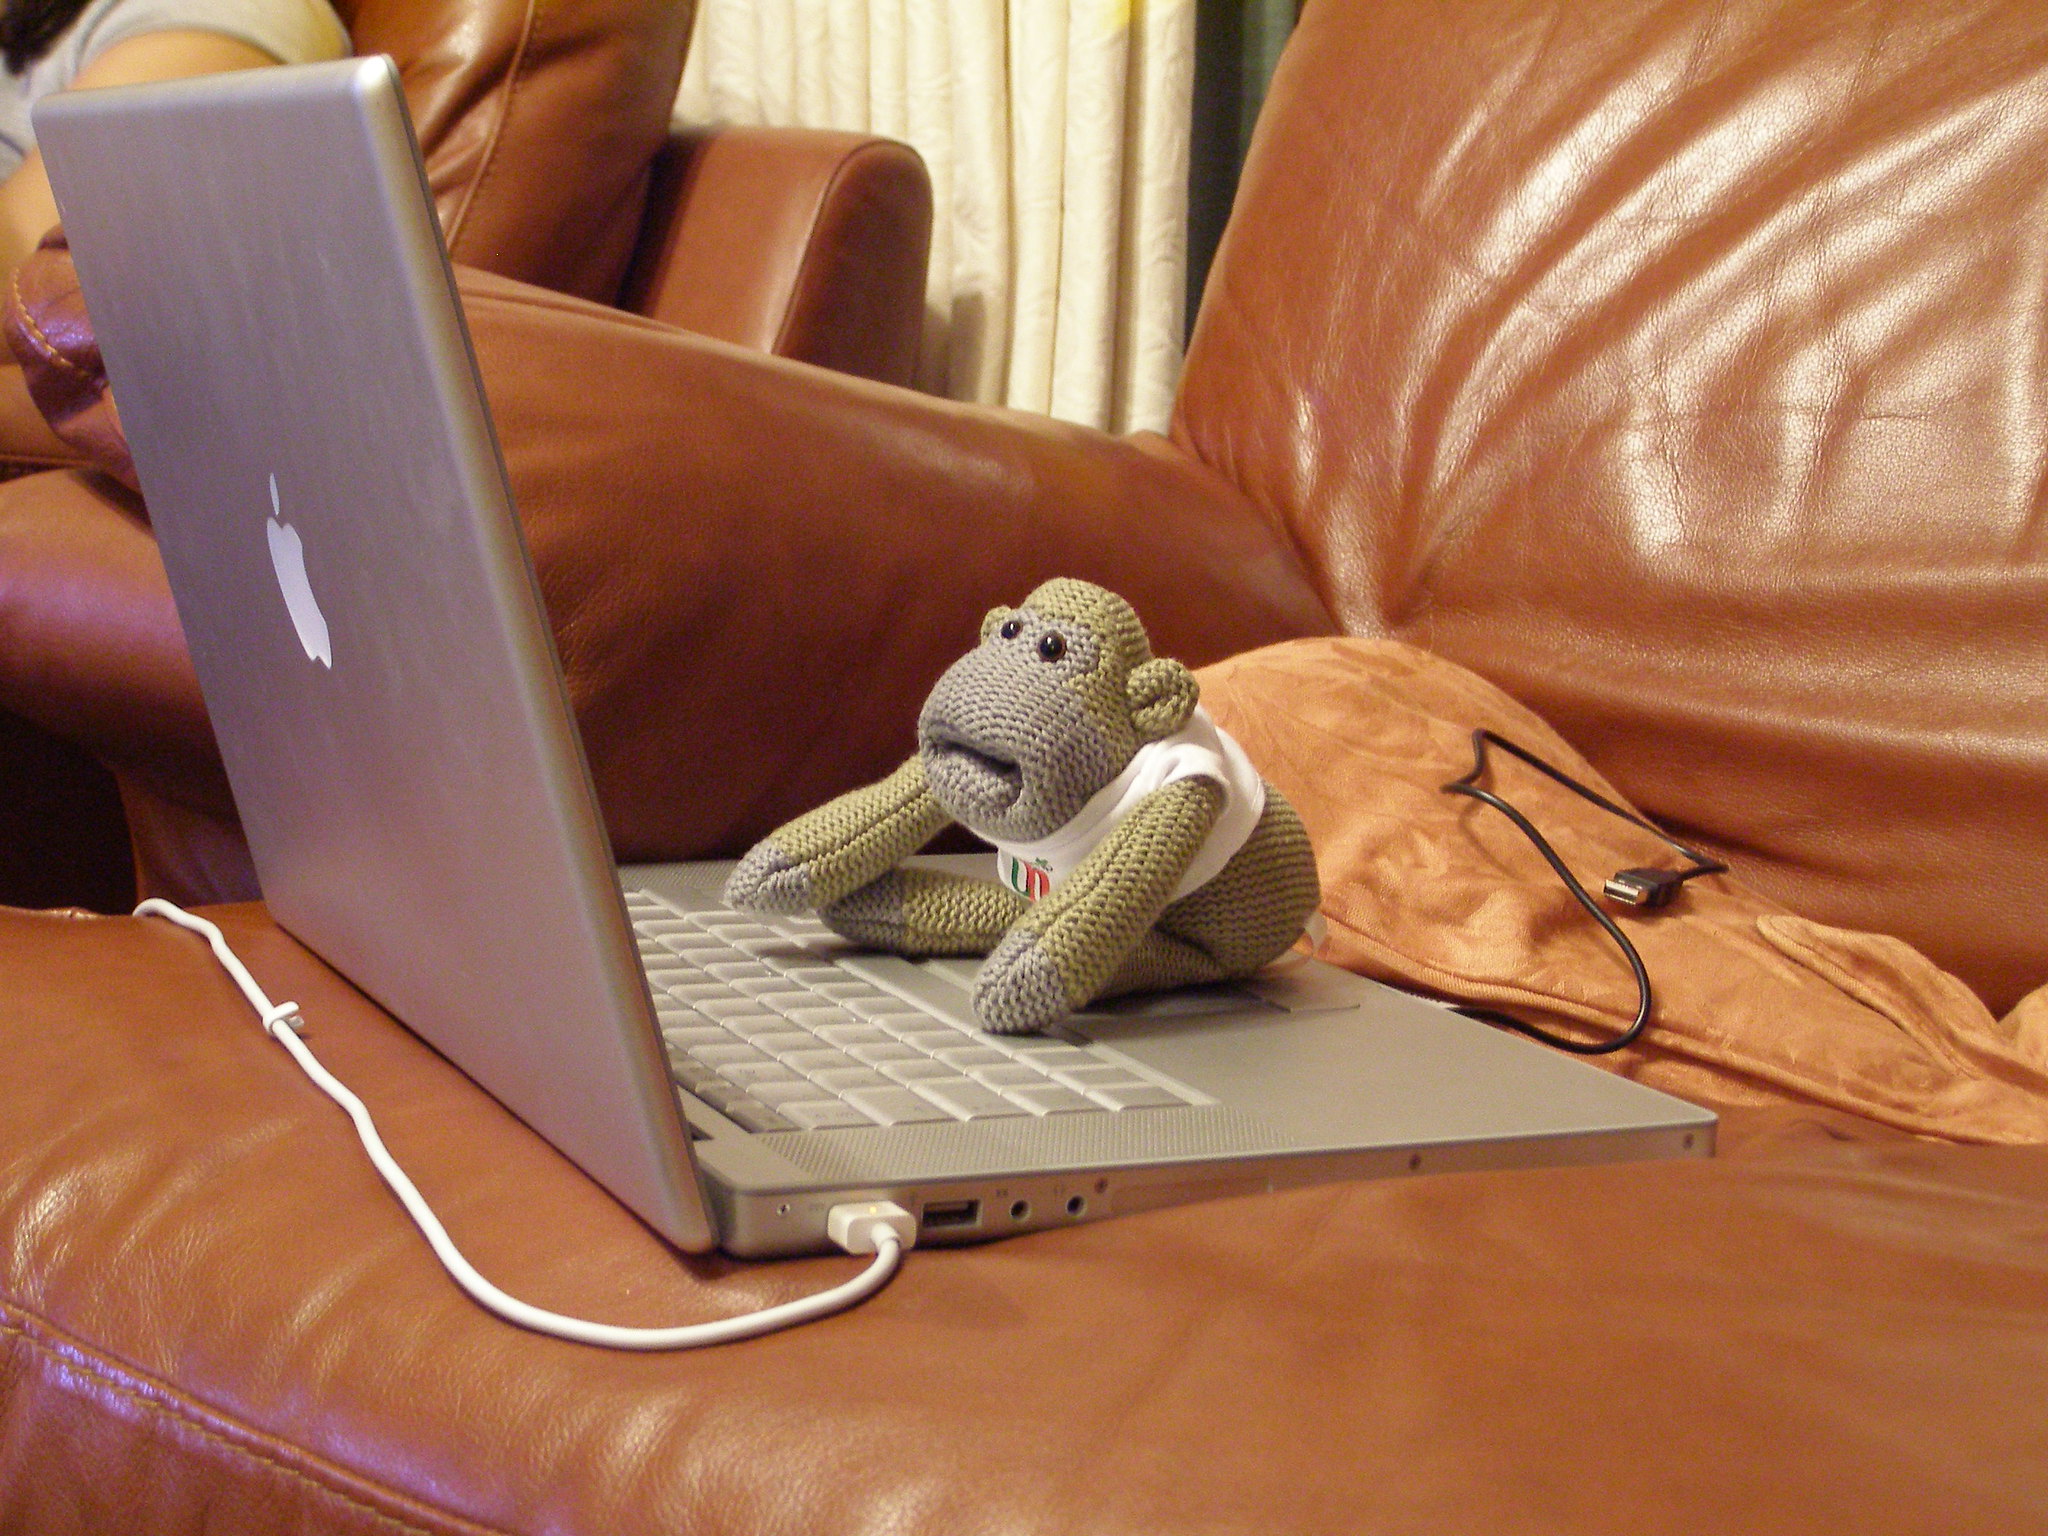 A knitted monkey working at a Mac